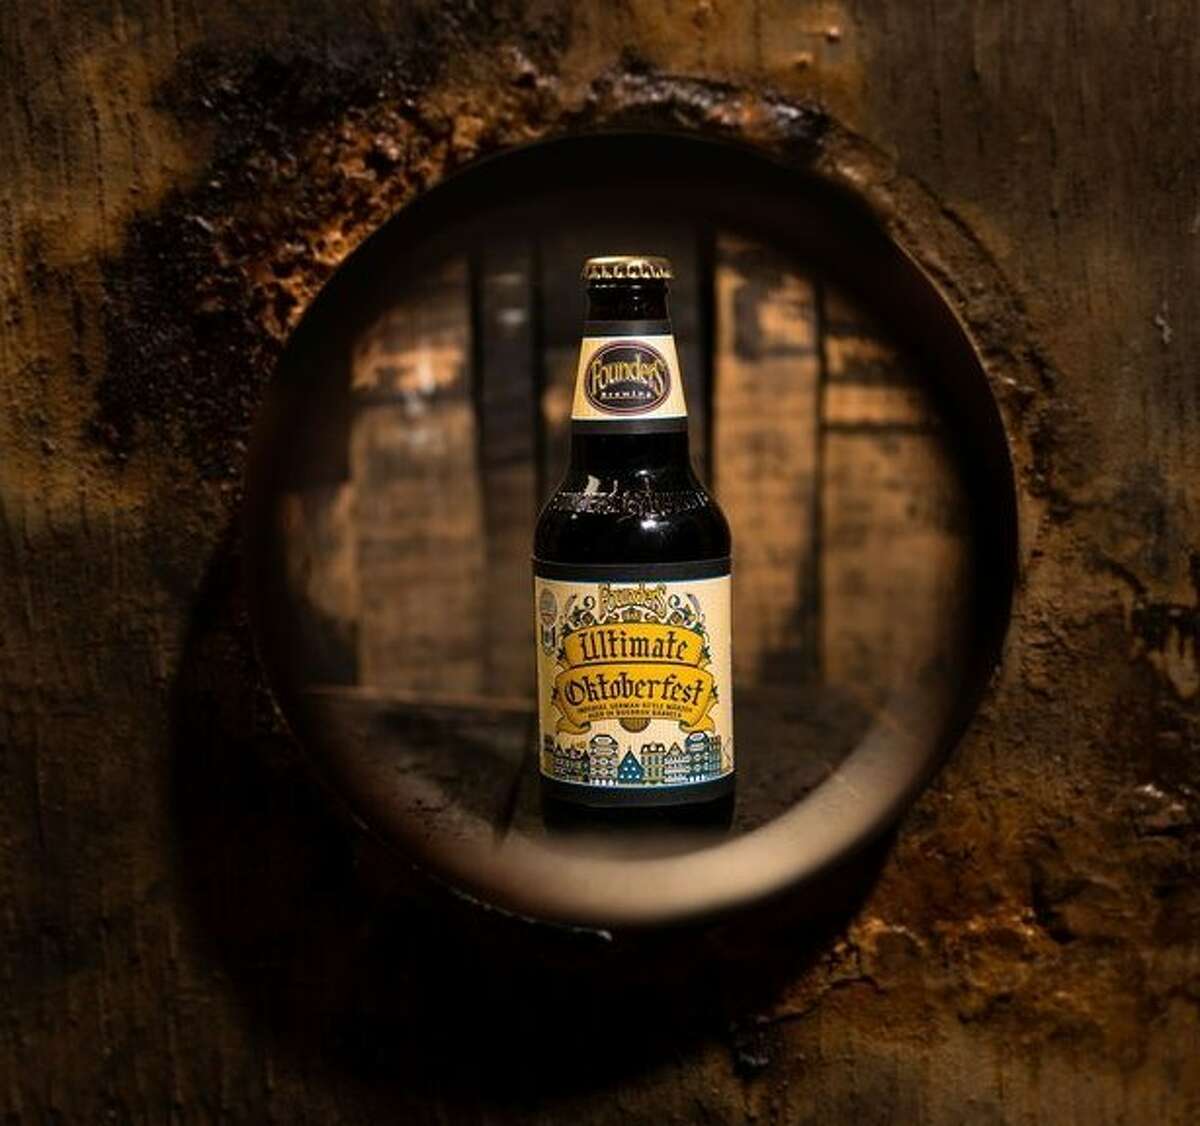 Founders Ultimate Oktoberfest is a classic German-style Marzen kicked up a notch by adding the smooth, rich flavors that only nine months in a bourbon barrel can provide.